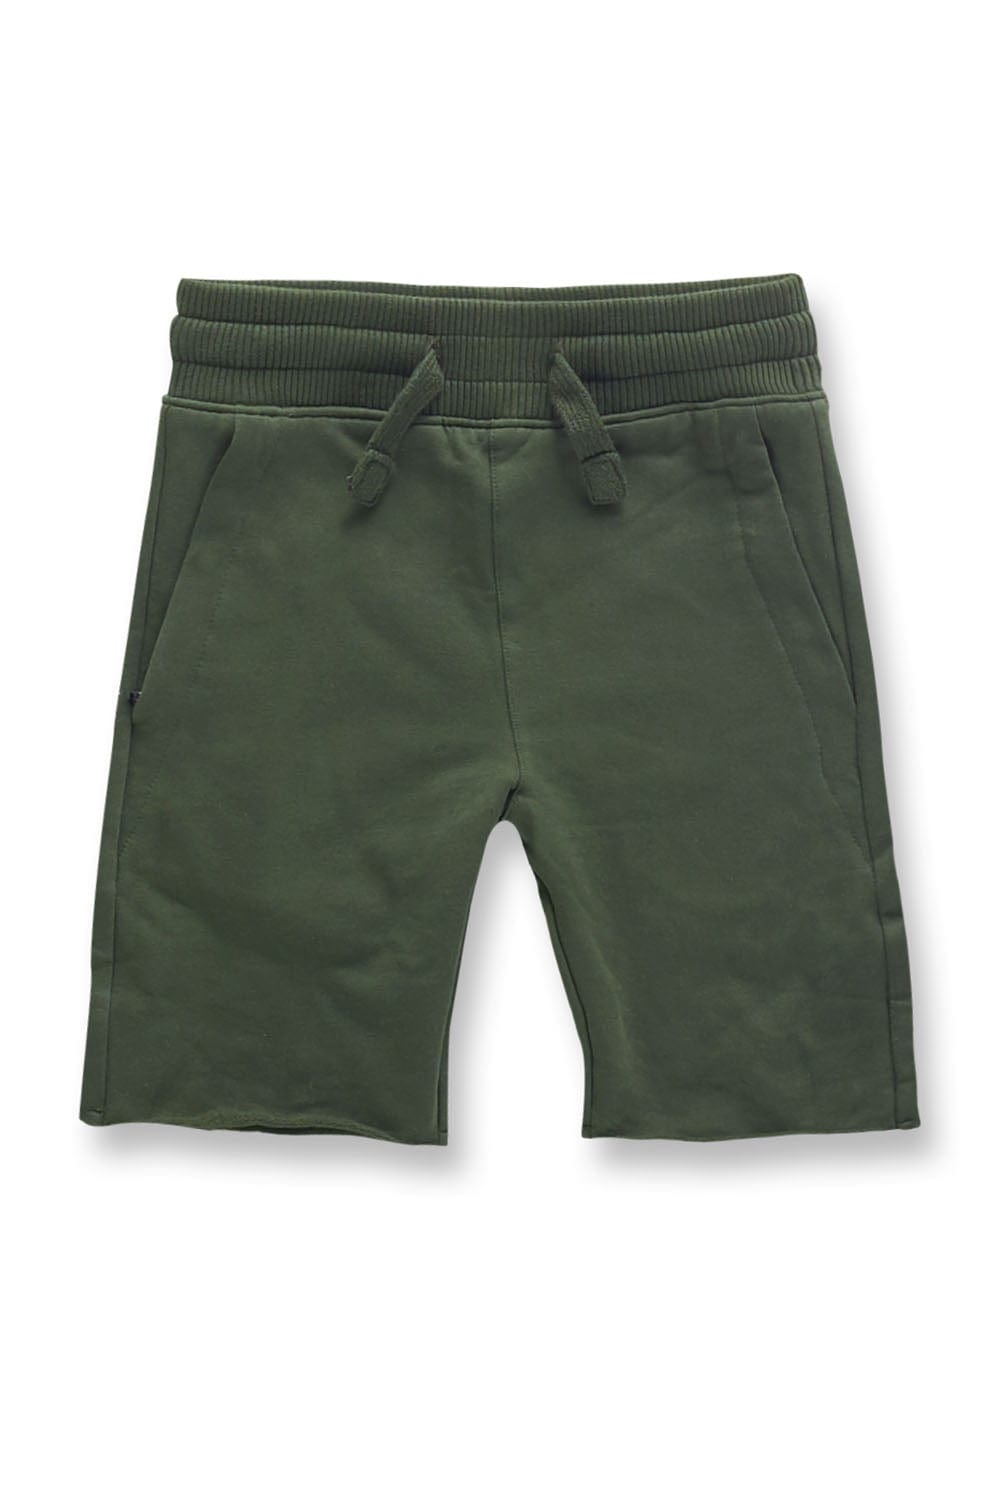 JC Kids Kids Palma French Terry Shorts (Name Your Price) Army Green / 2